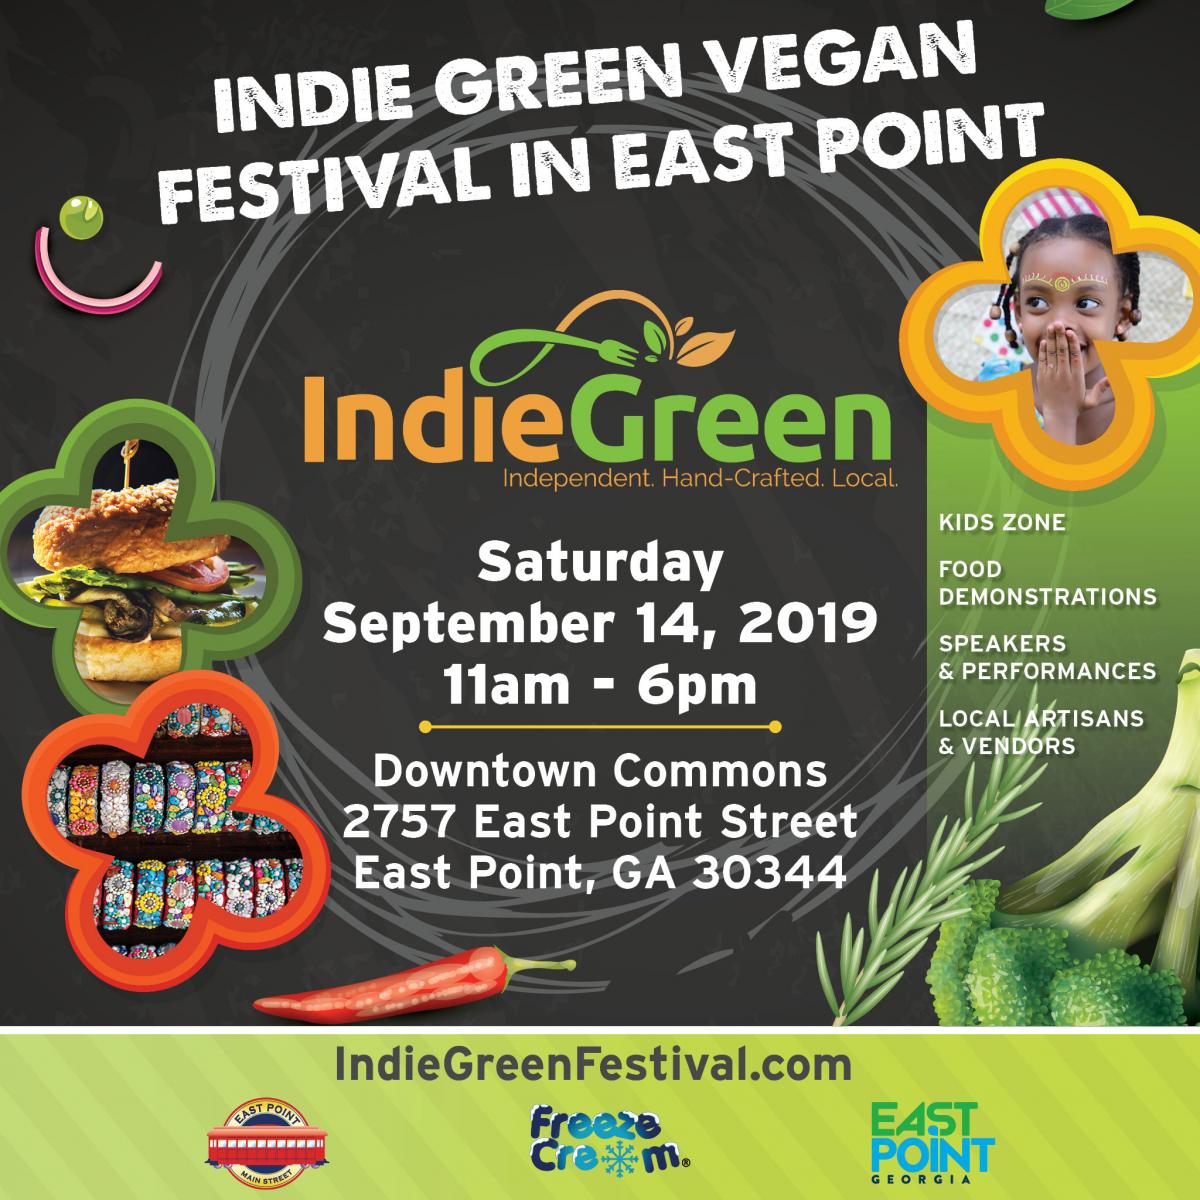 Indie Green Festival in East Point